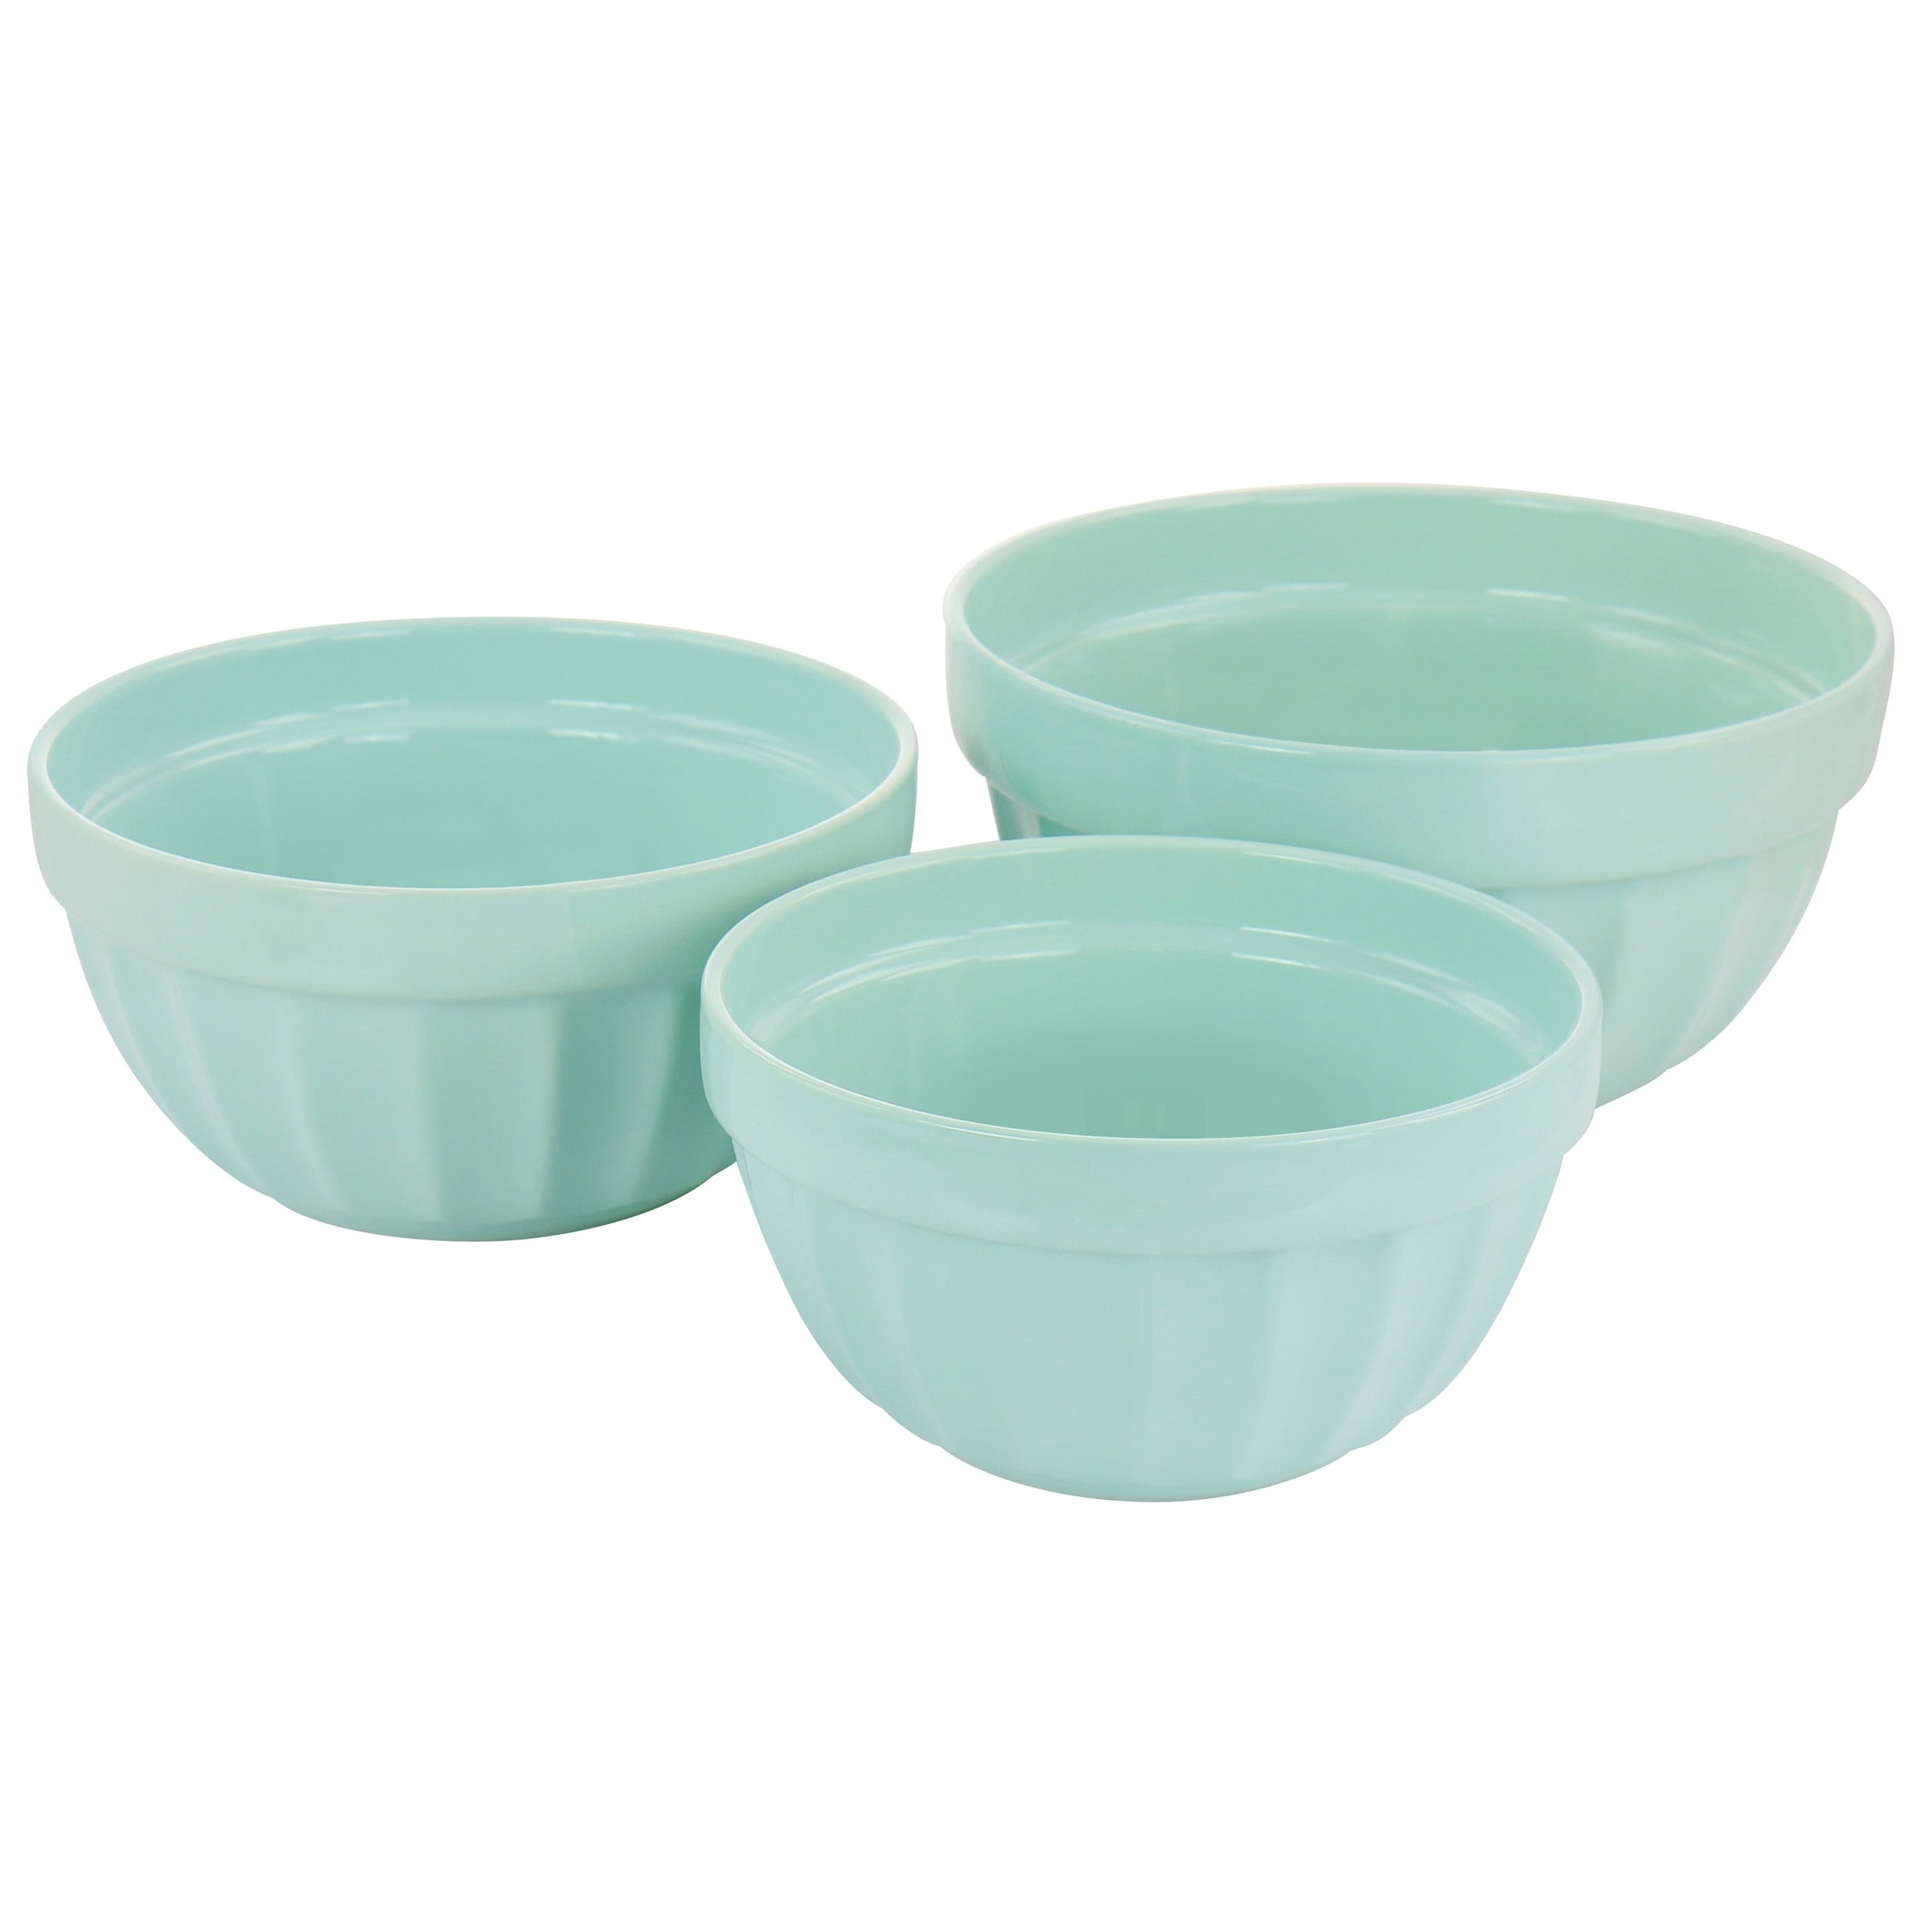 https://ak1.ostkcdn.com/images/products/is/images/direct/a45d6ddb73056b8c37d0487c3e3e65e0e4483b0c/Martha-Stewart-3-Piece-Stoneware-Bowl-Set-in-Mint.jpg